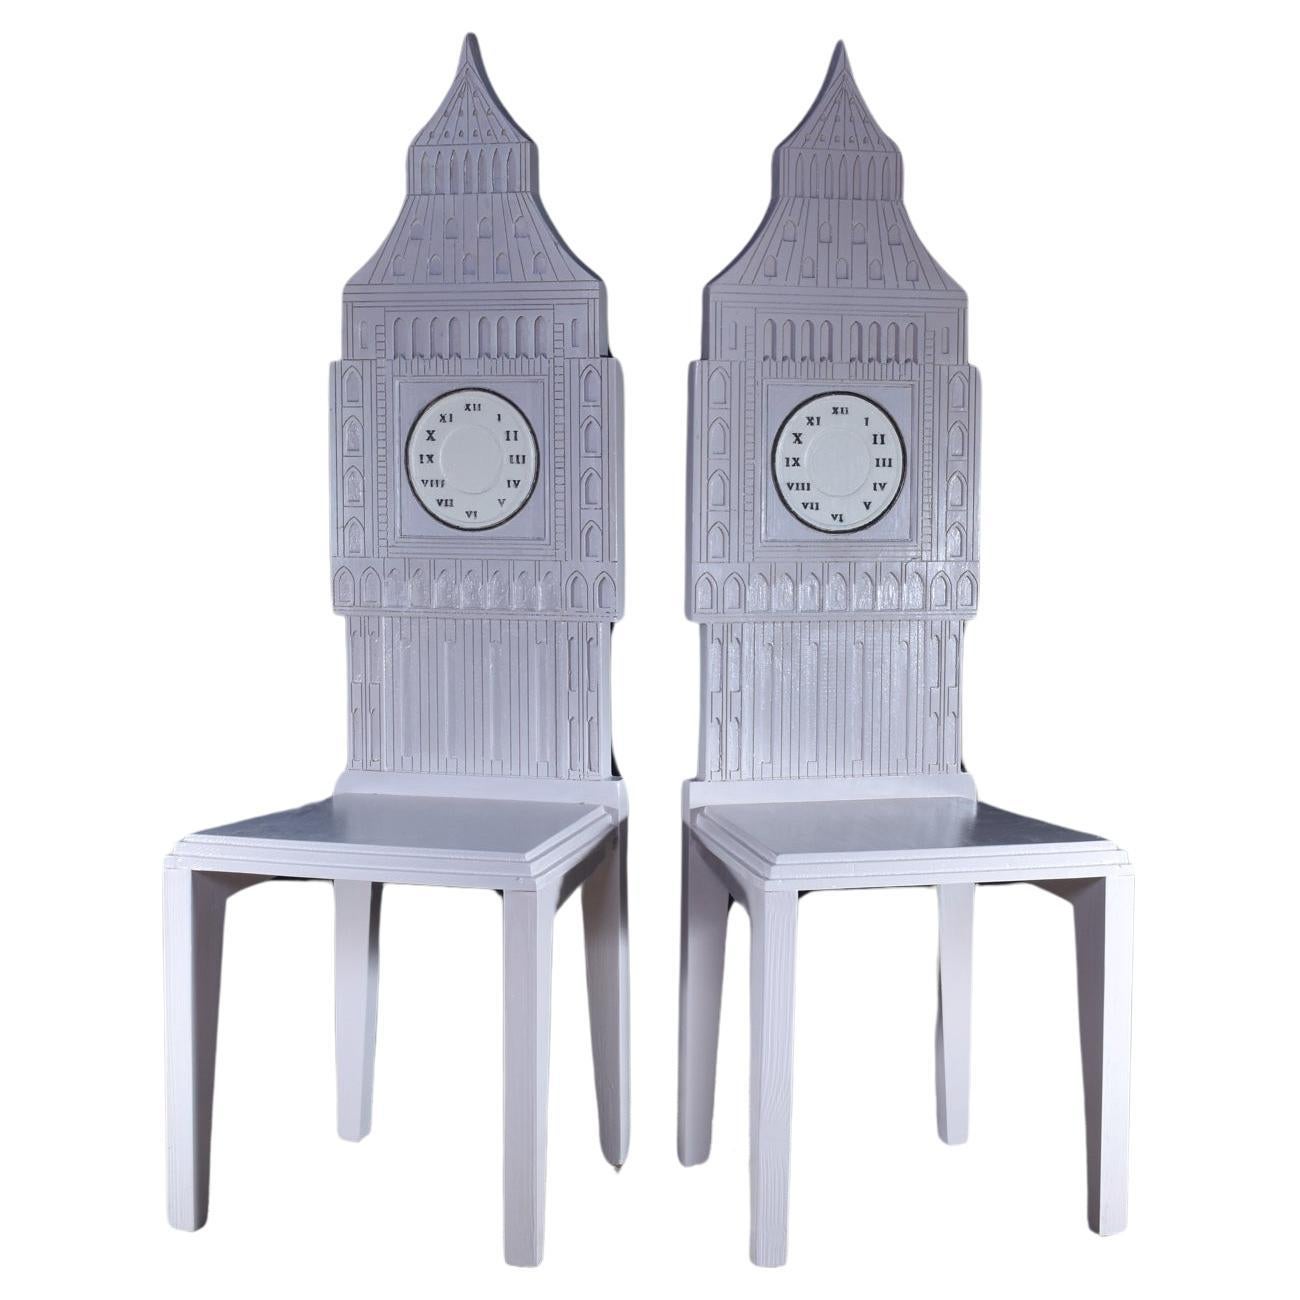 A towering pair of Big Ben chairs by the Italian designer Cosimo De Vita.

The chairs are hand crafted in Florence from solid Fir wood and finished in a light sandstone colour with cream and black detail. This iconic design of the Great Clock of